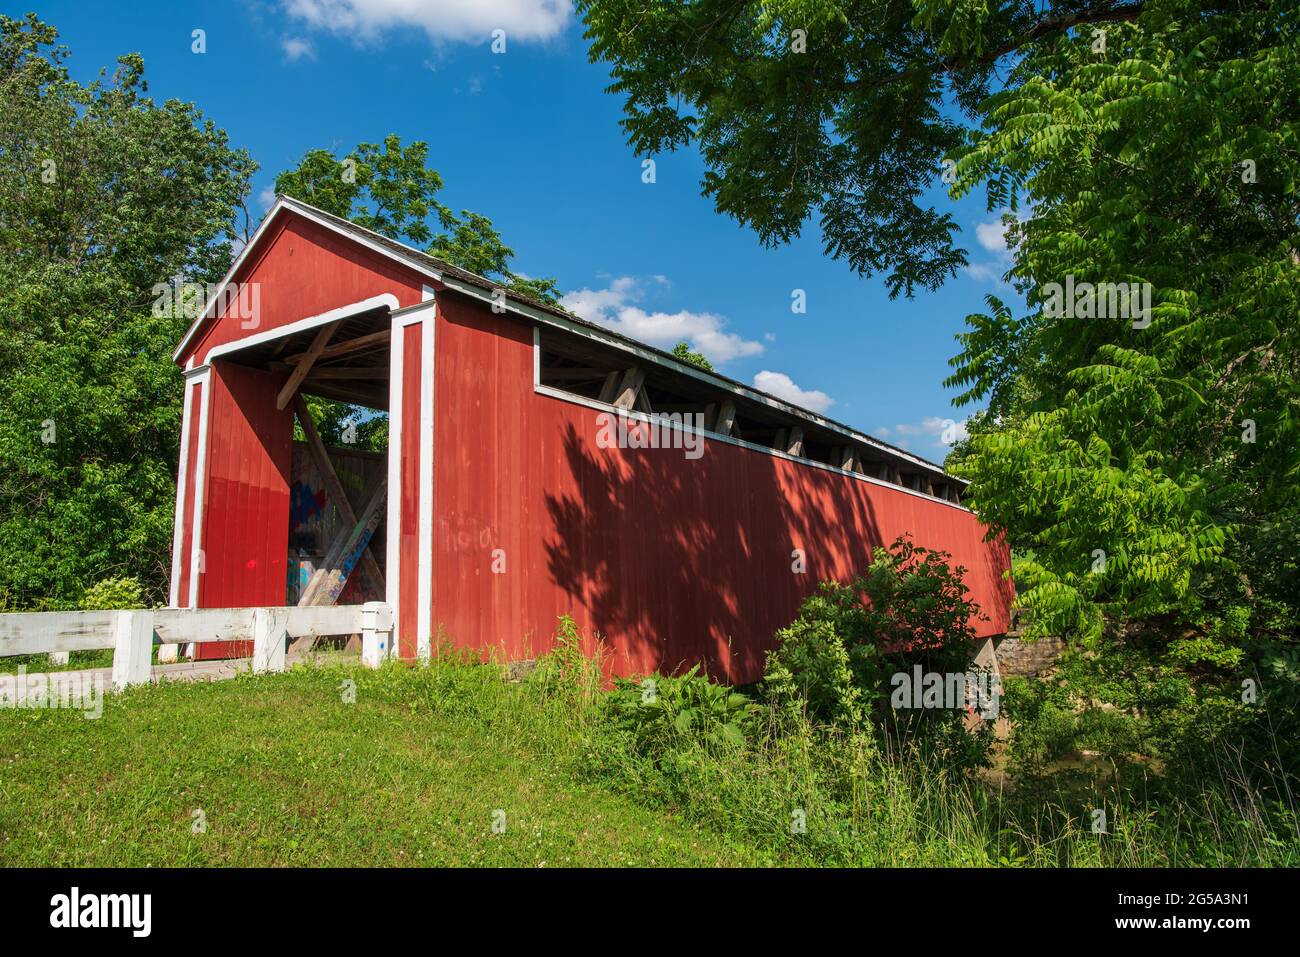 Stockheughter Covered Bridge, also known as Enochsburg Covered Bridge, is a historic Howe Truss covered bridge over Salt Creek, located in Ray Townshi Stock Photo